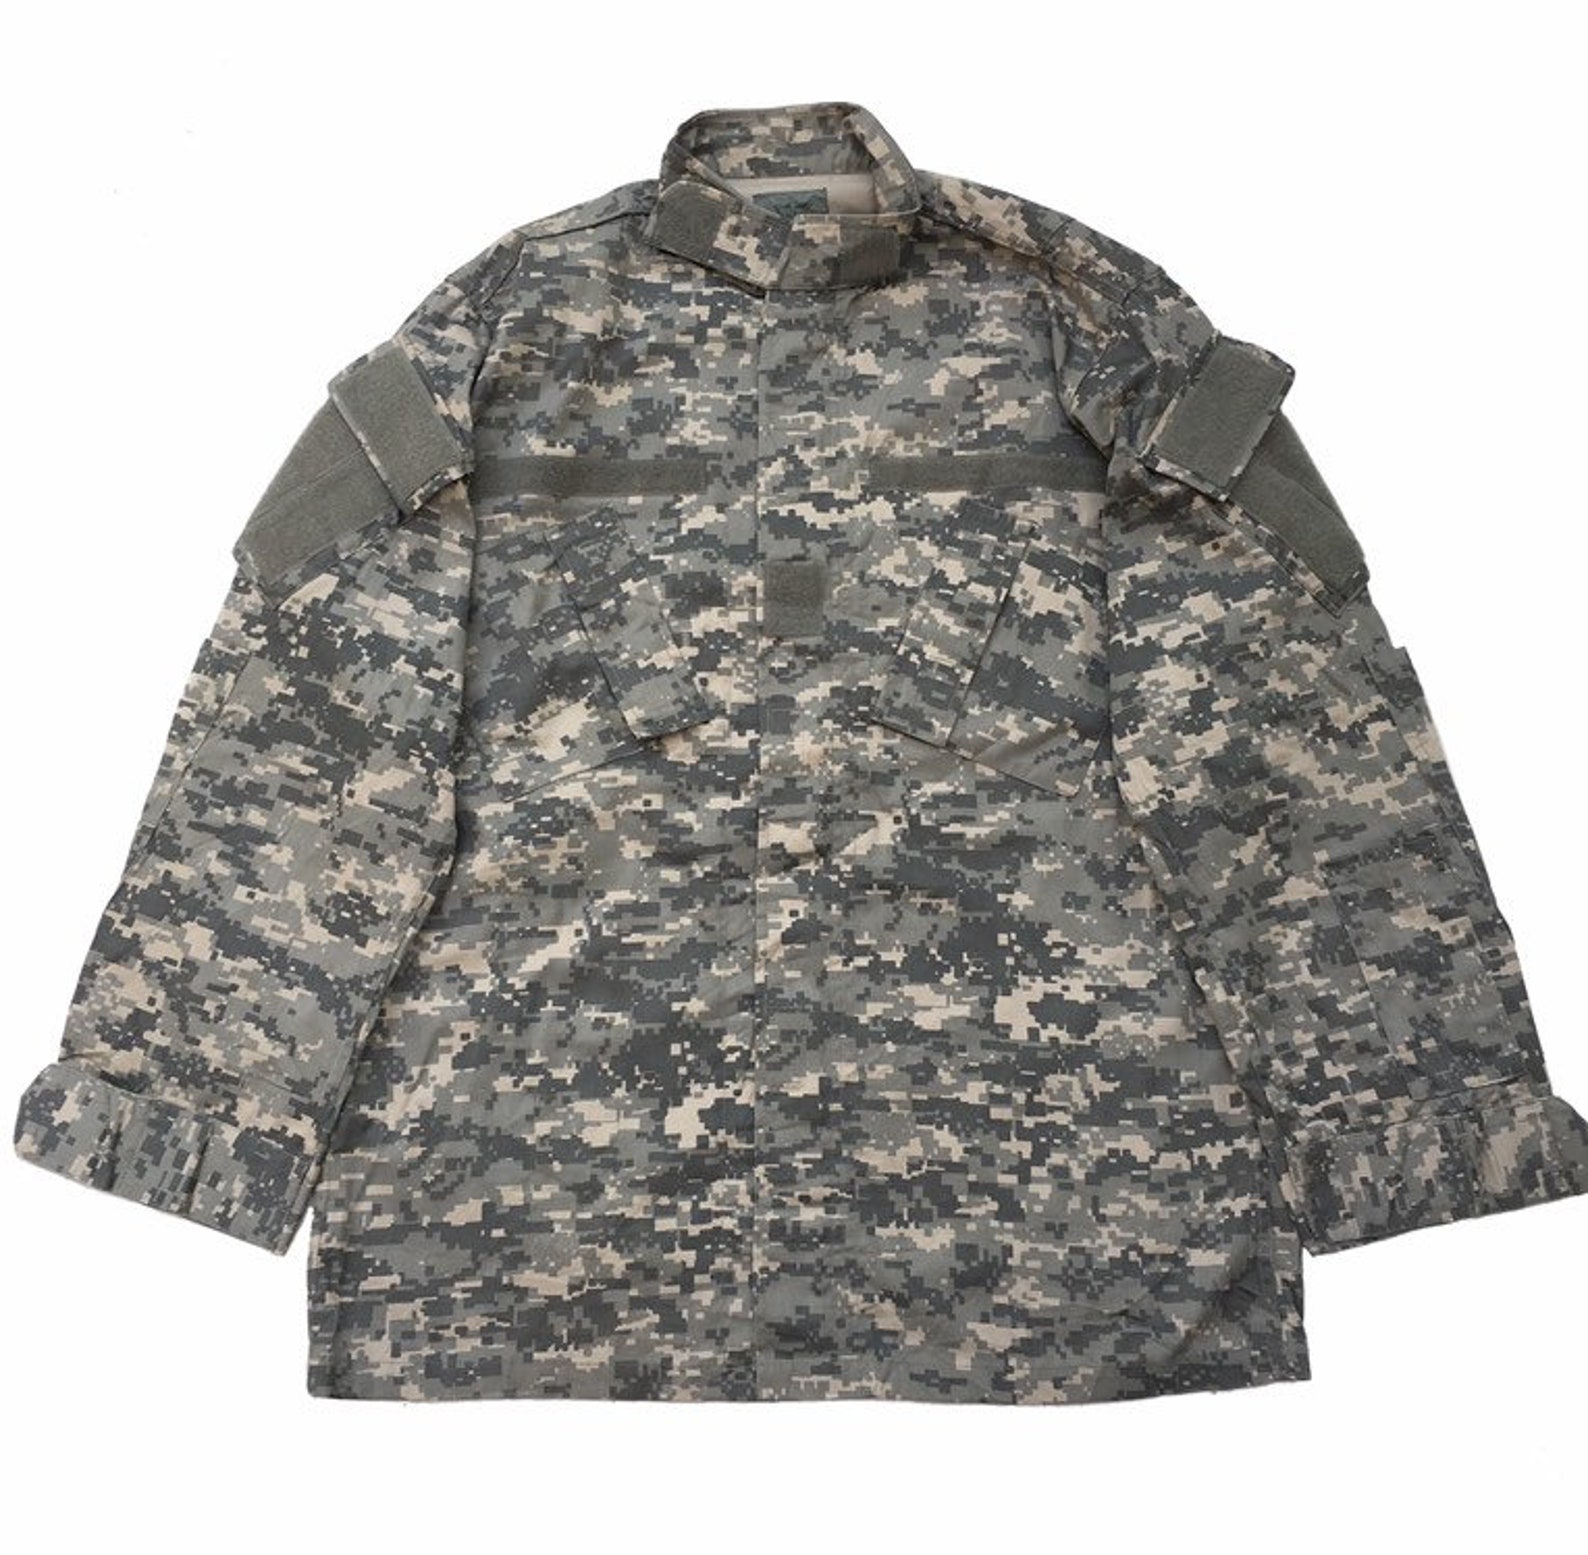 A Tacs Ghost Gear Assault Force Military Jacket Digital Camouflage Camo ...